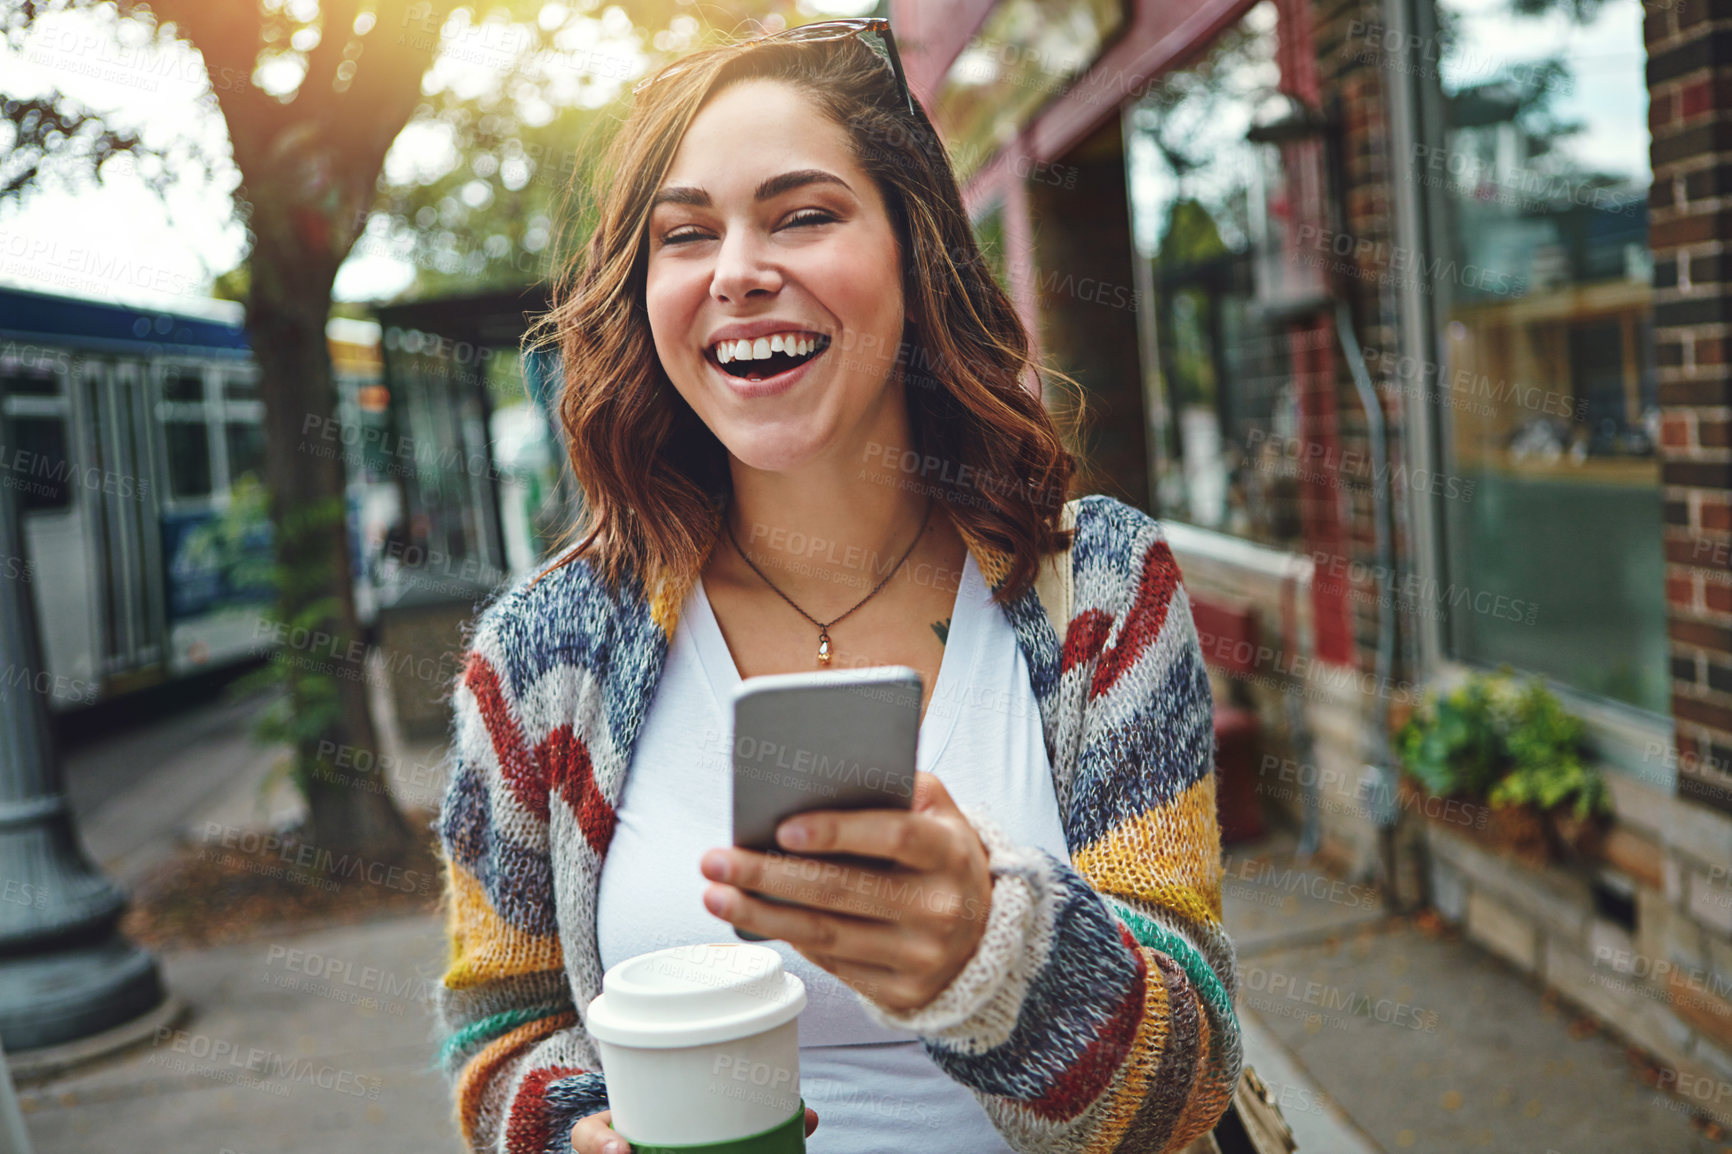 Buy stock photo Shot of a happy young woman using her cellphone while taking a walk downtown